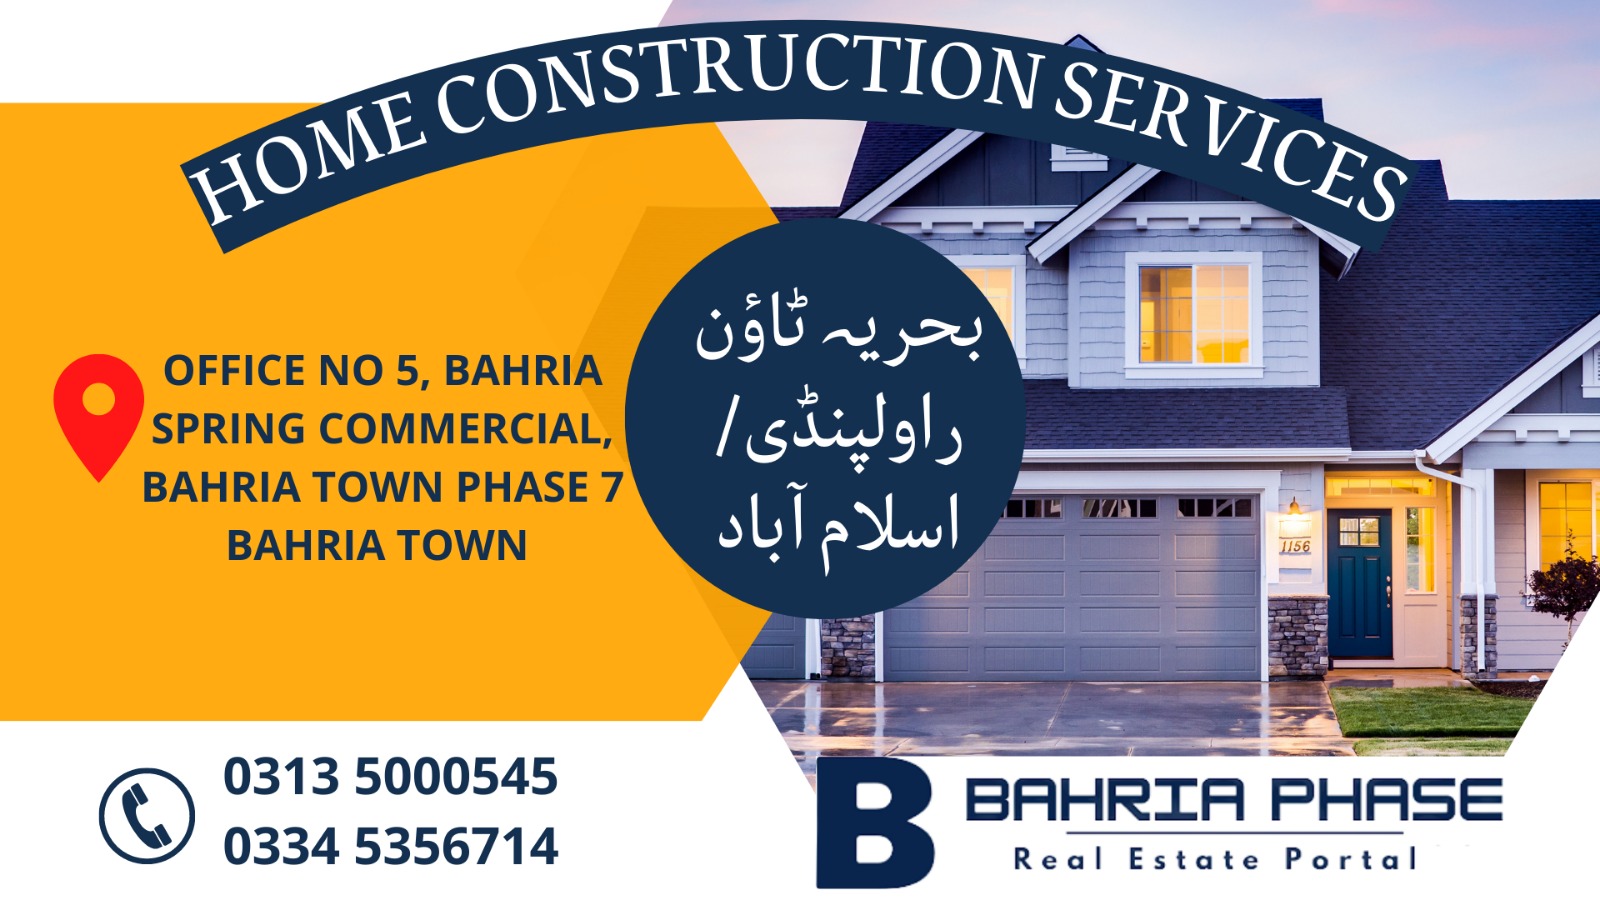 Home construction services in Bahria Town Rawalpindi, Office No 5, Bahria Spring Commercial, Bahria Town,Punjab,Pakistan